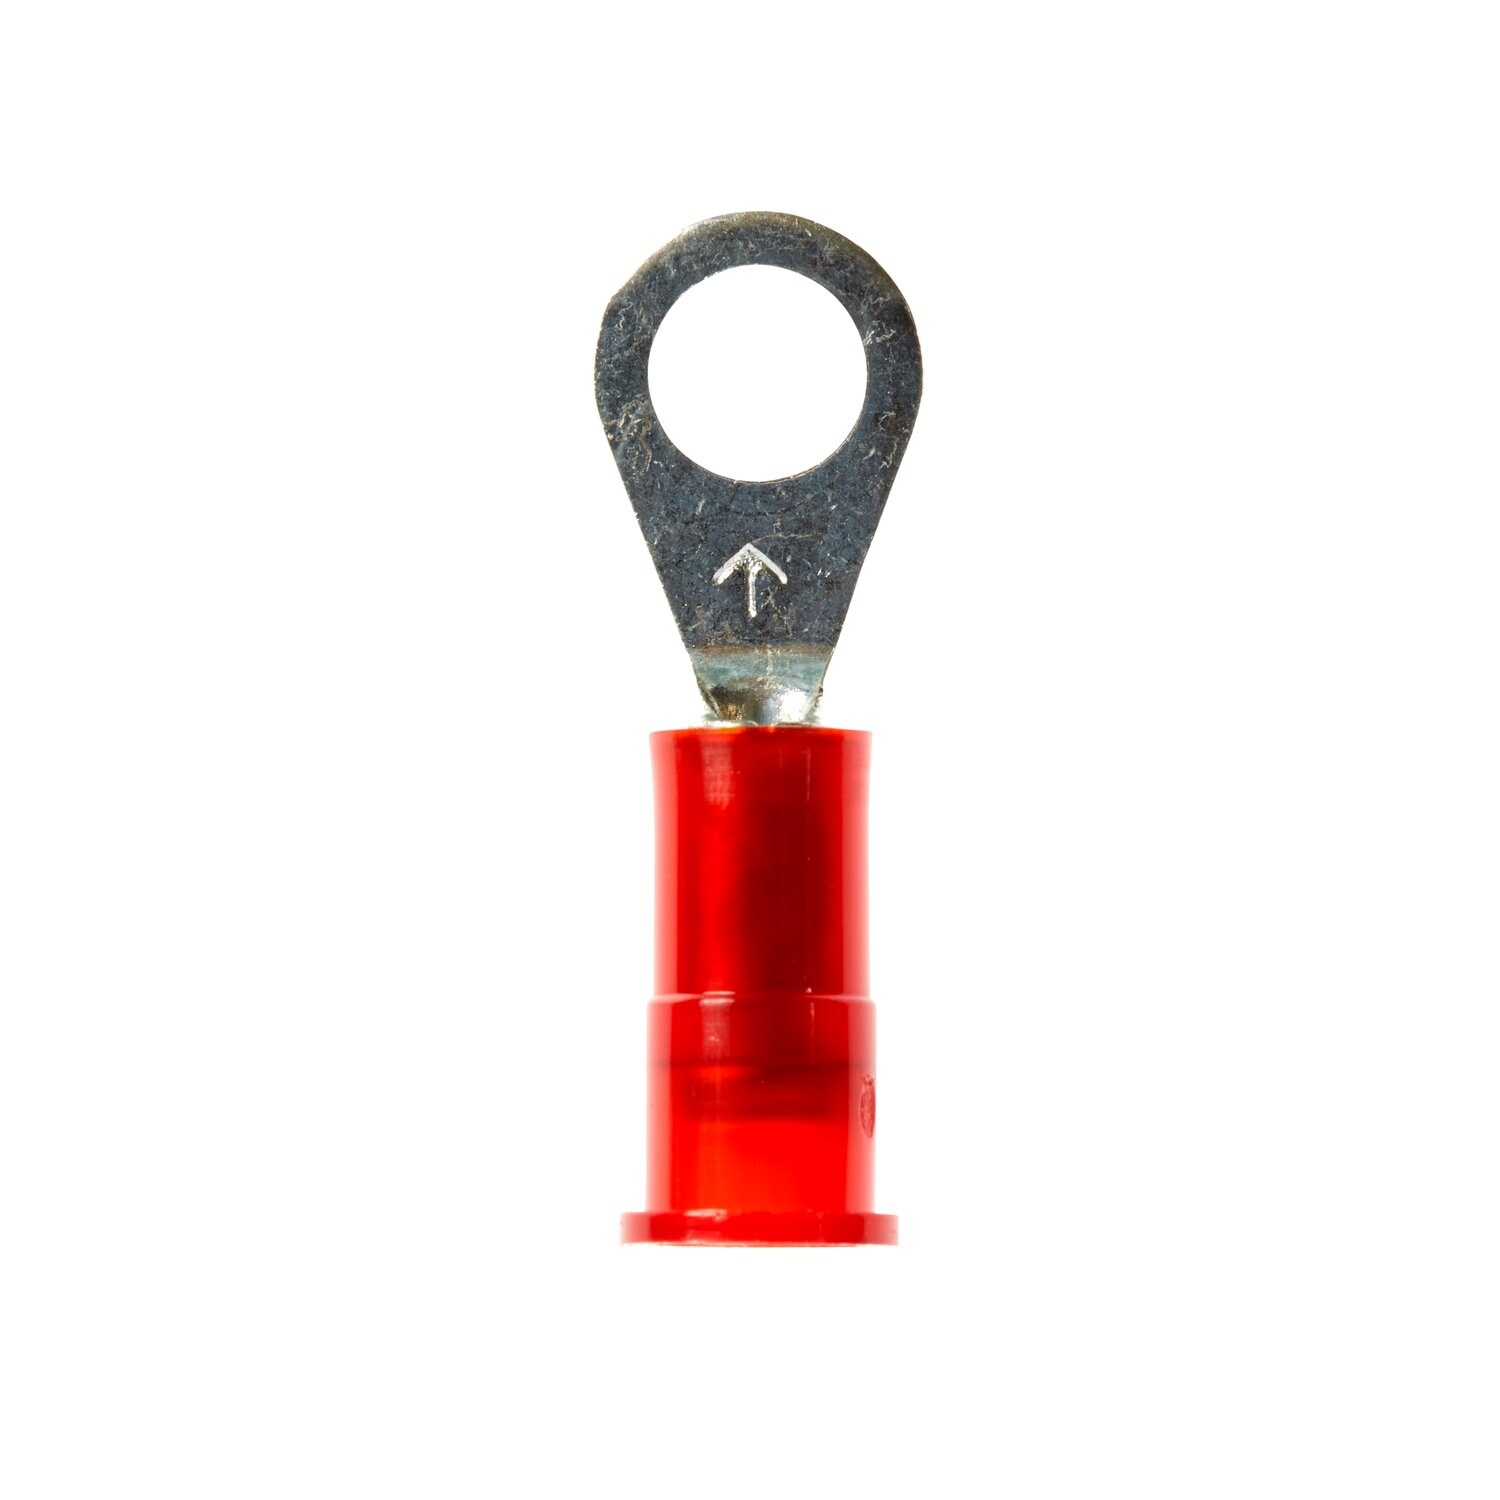 7100163929 - 3M Scotchlok Ring Tongue, Nylon Insulated w/Insulation Grip
MNG18-10R/LK, Stud Size 10, 1000/Case